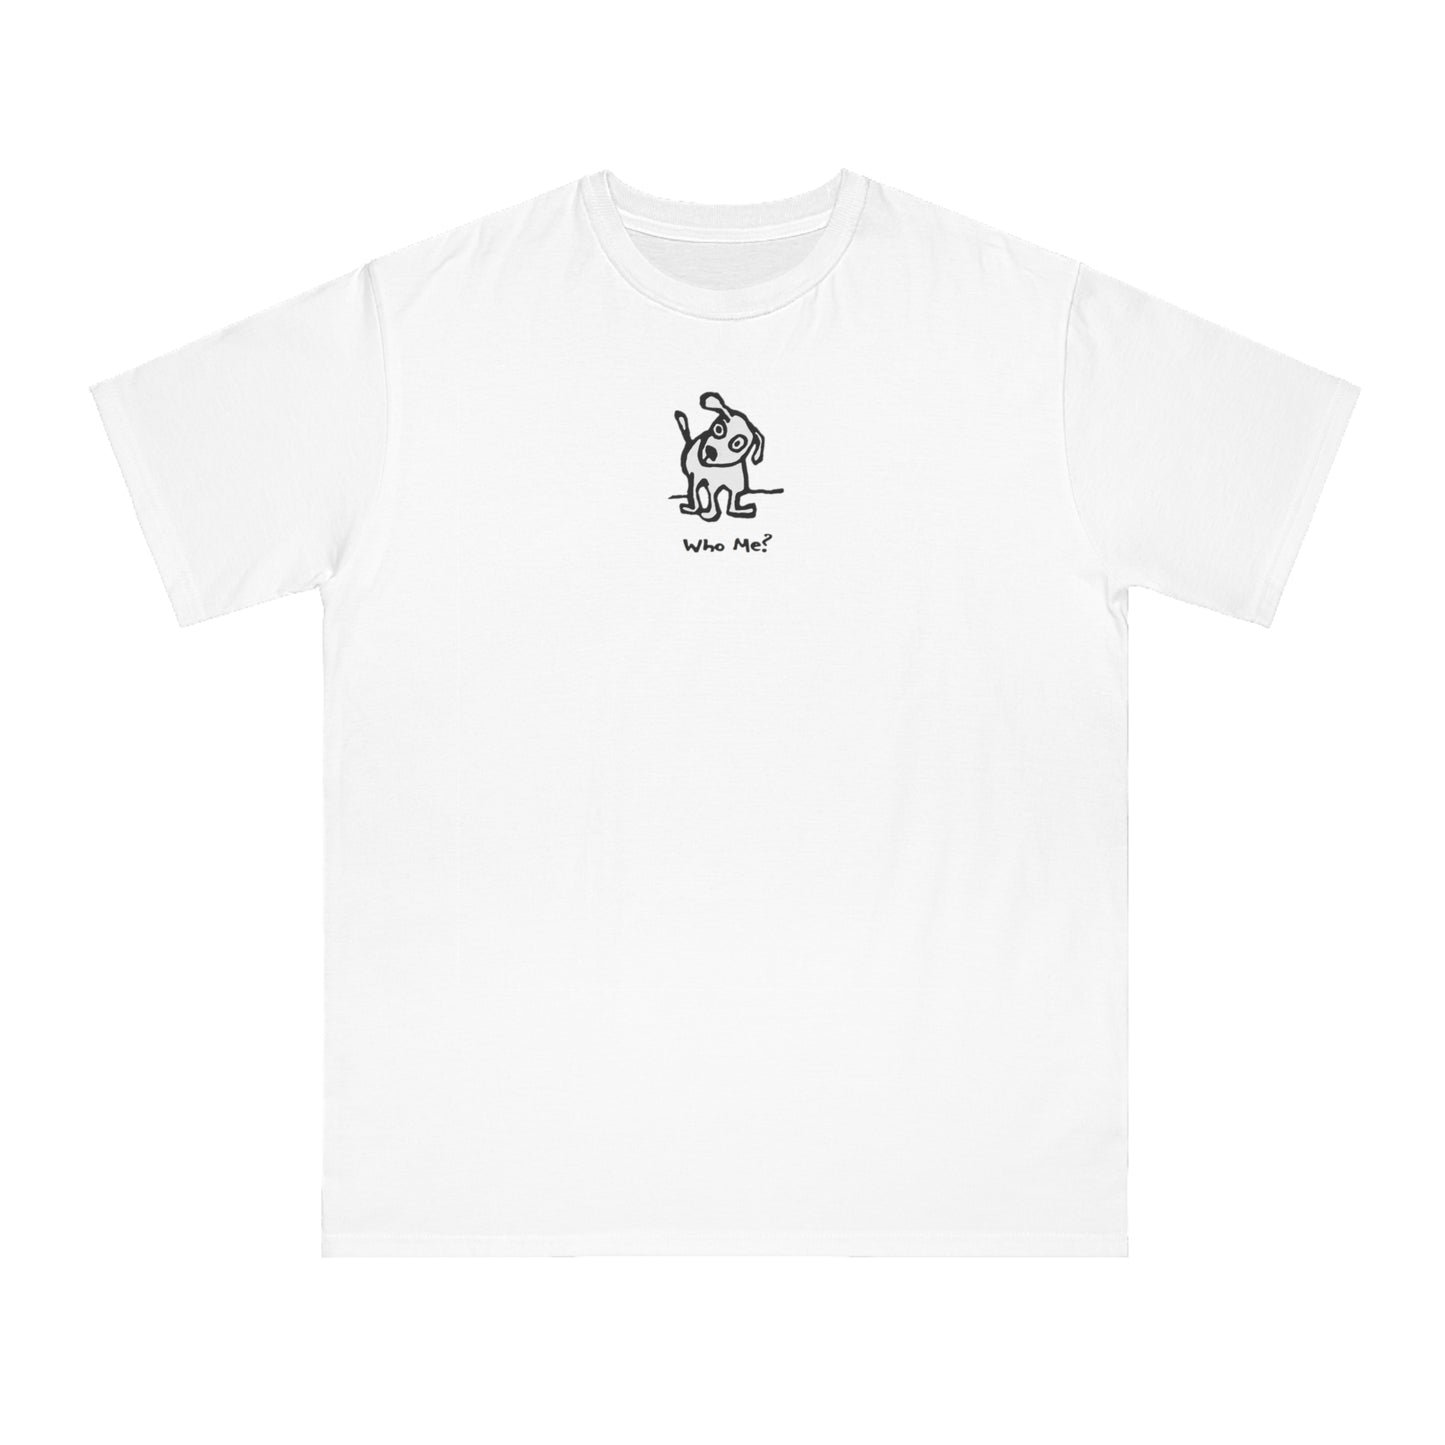 White dog with head cocked to one side on white unisex men's t-shirt. Text under image reads Who Me